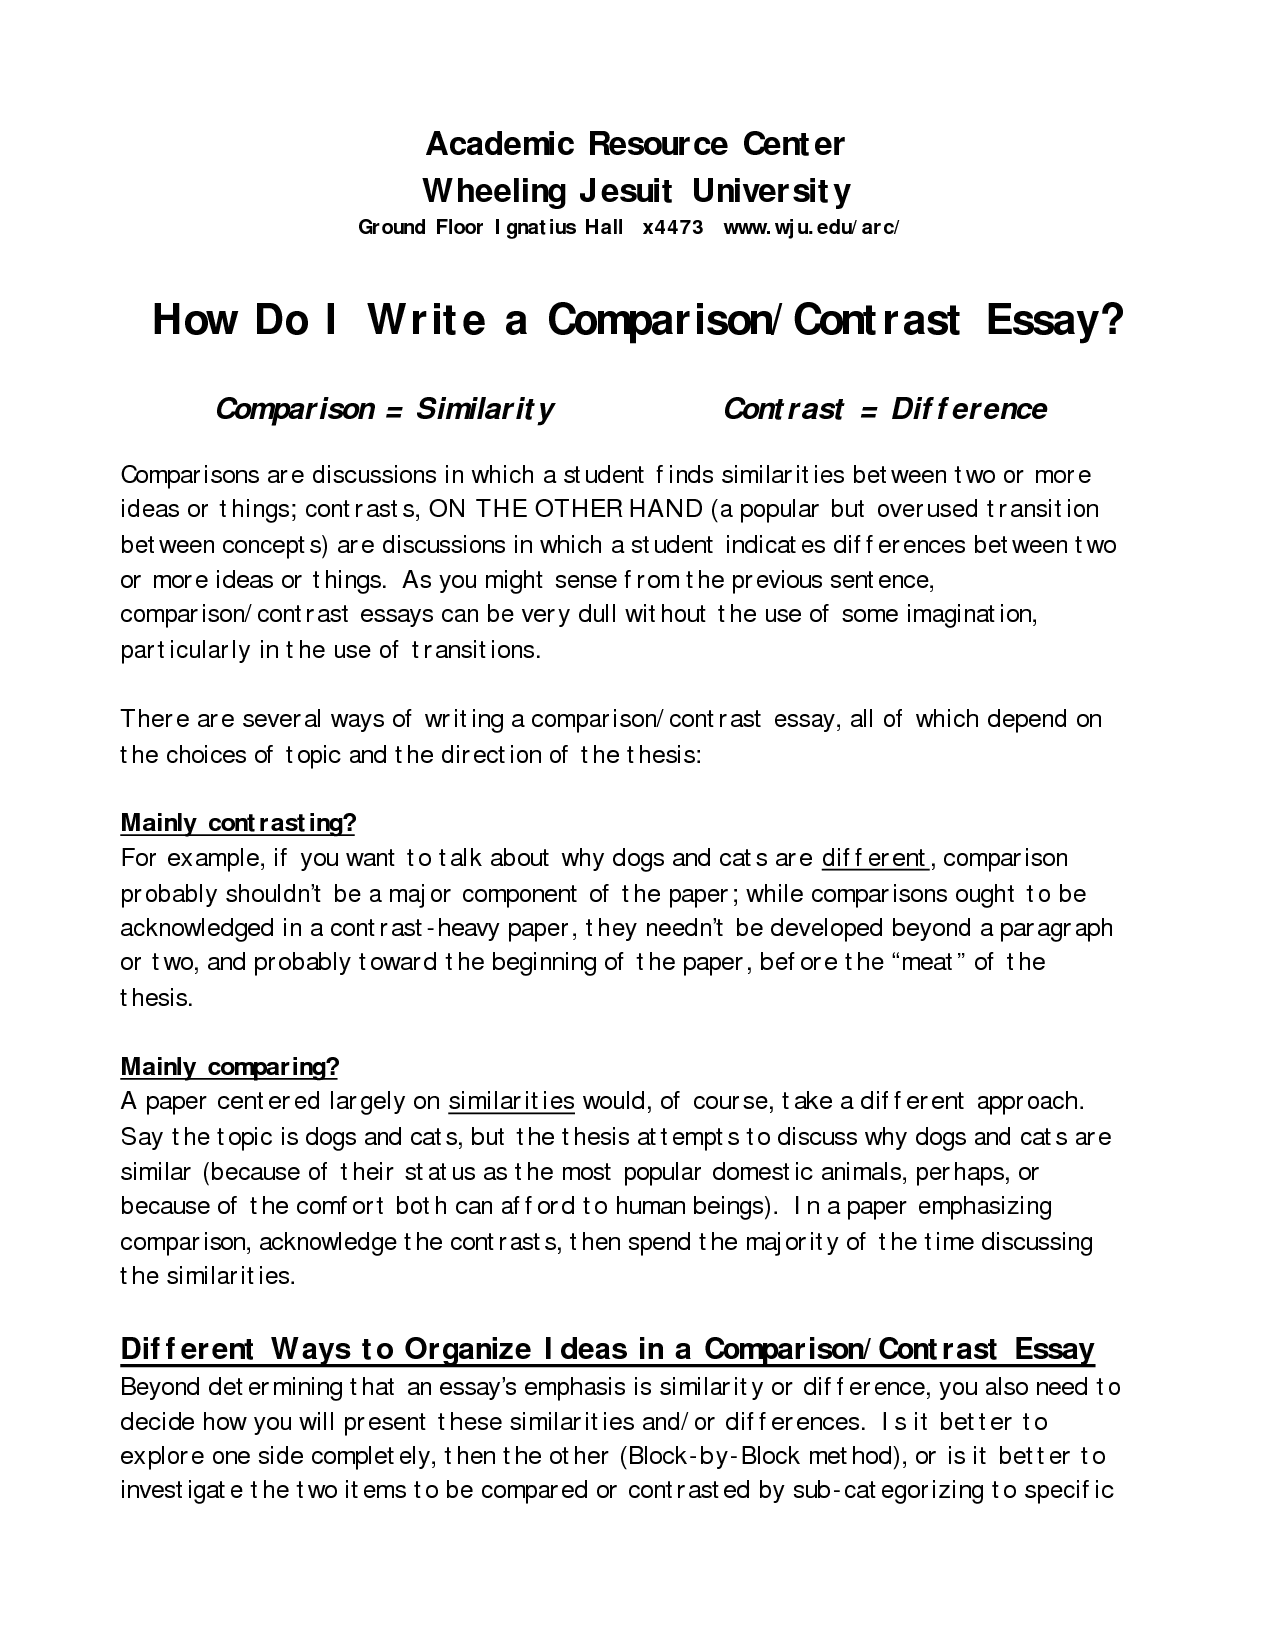 Writing a comparative essay using block style